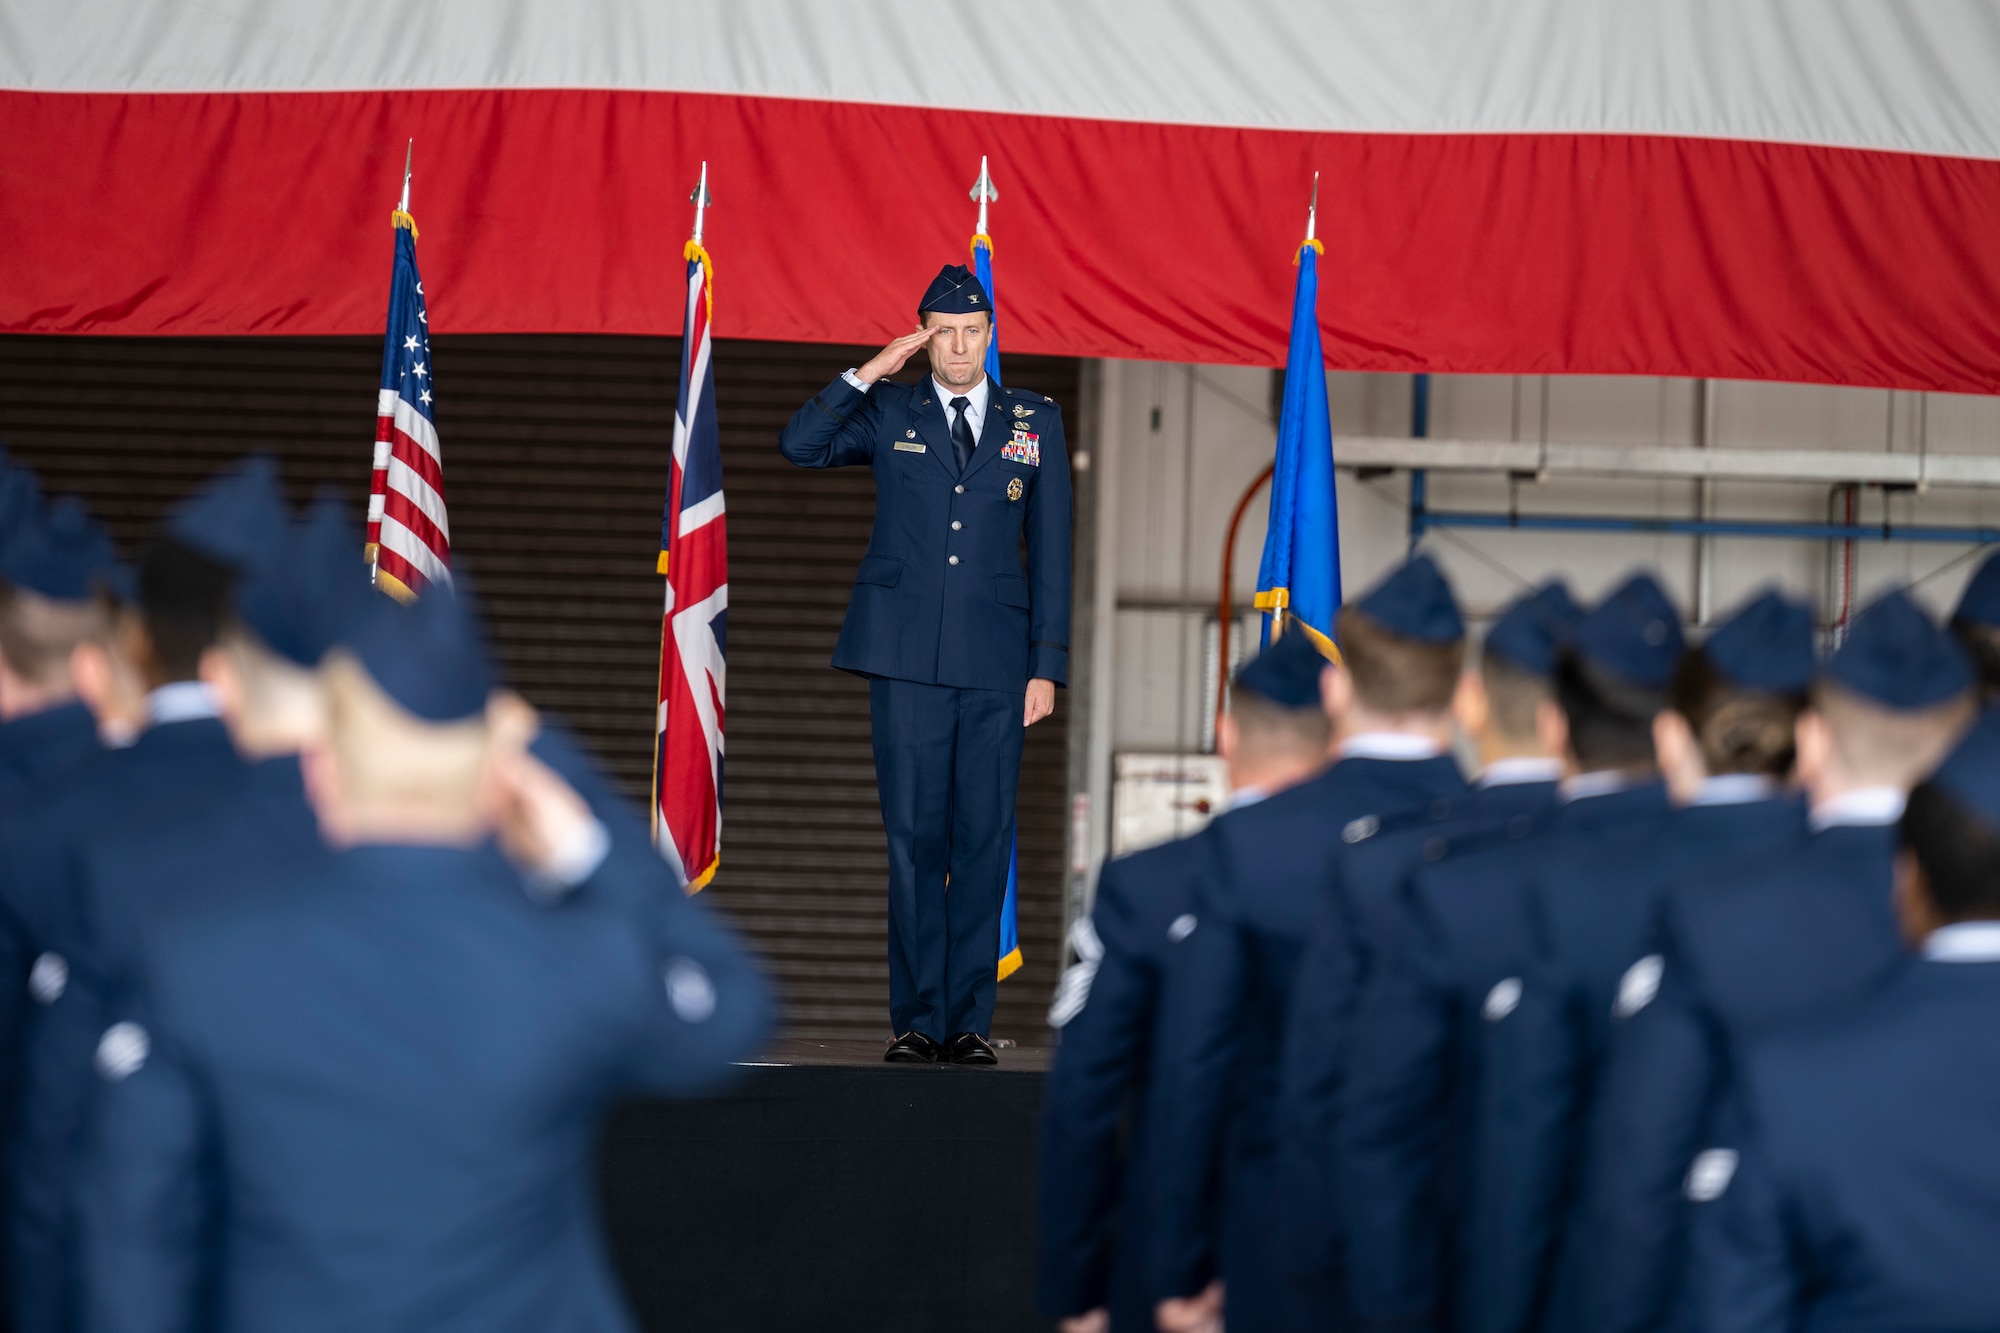 U.S. Air Force Maj. Gen. Derek France, Third Air Force commander, presided over the ceremony as Col. Gene Jacobus relinquished command to Col. Ryan Garlow.